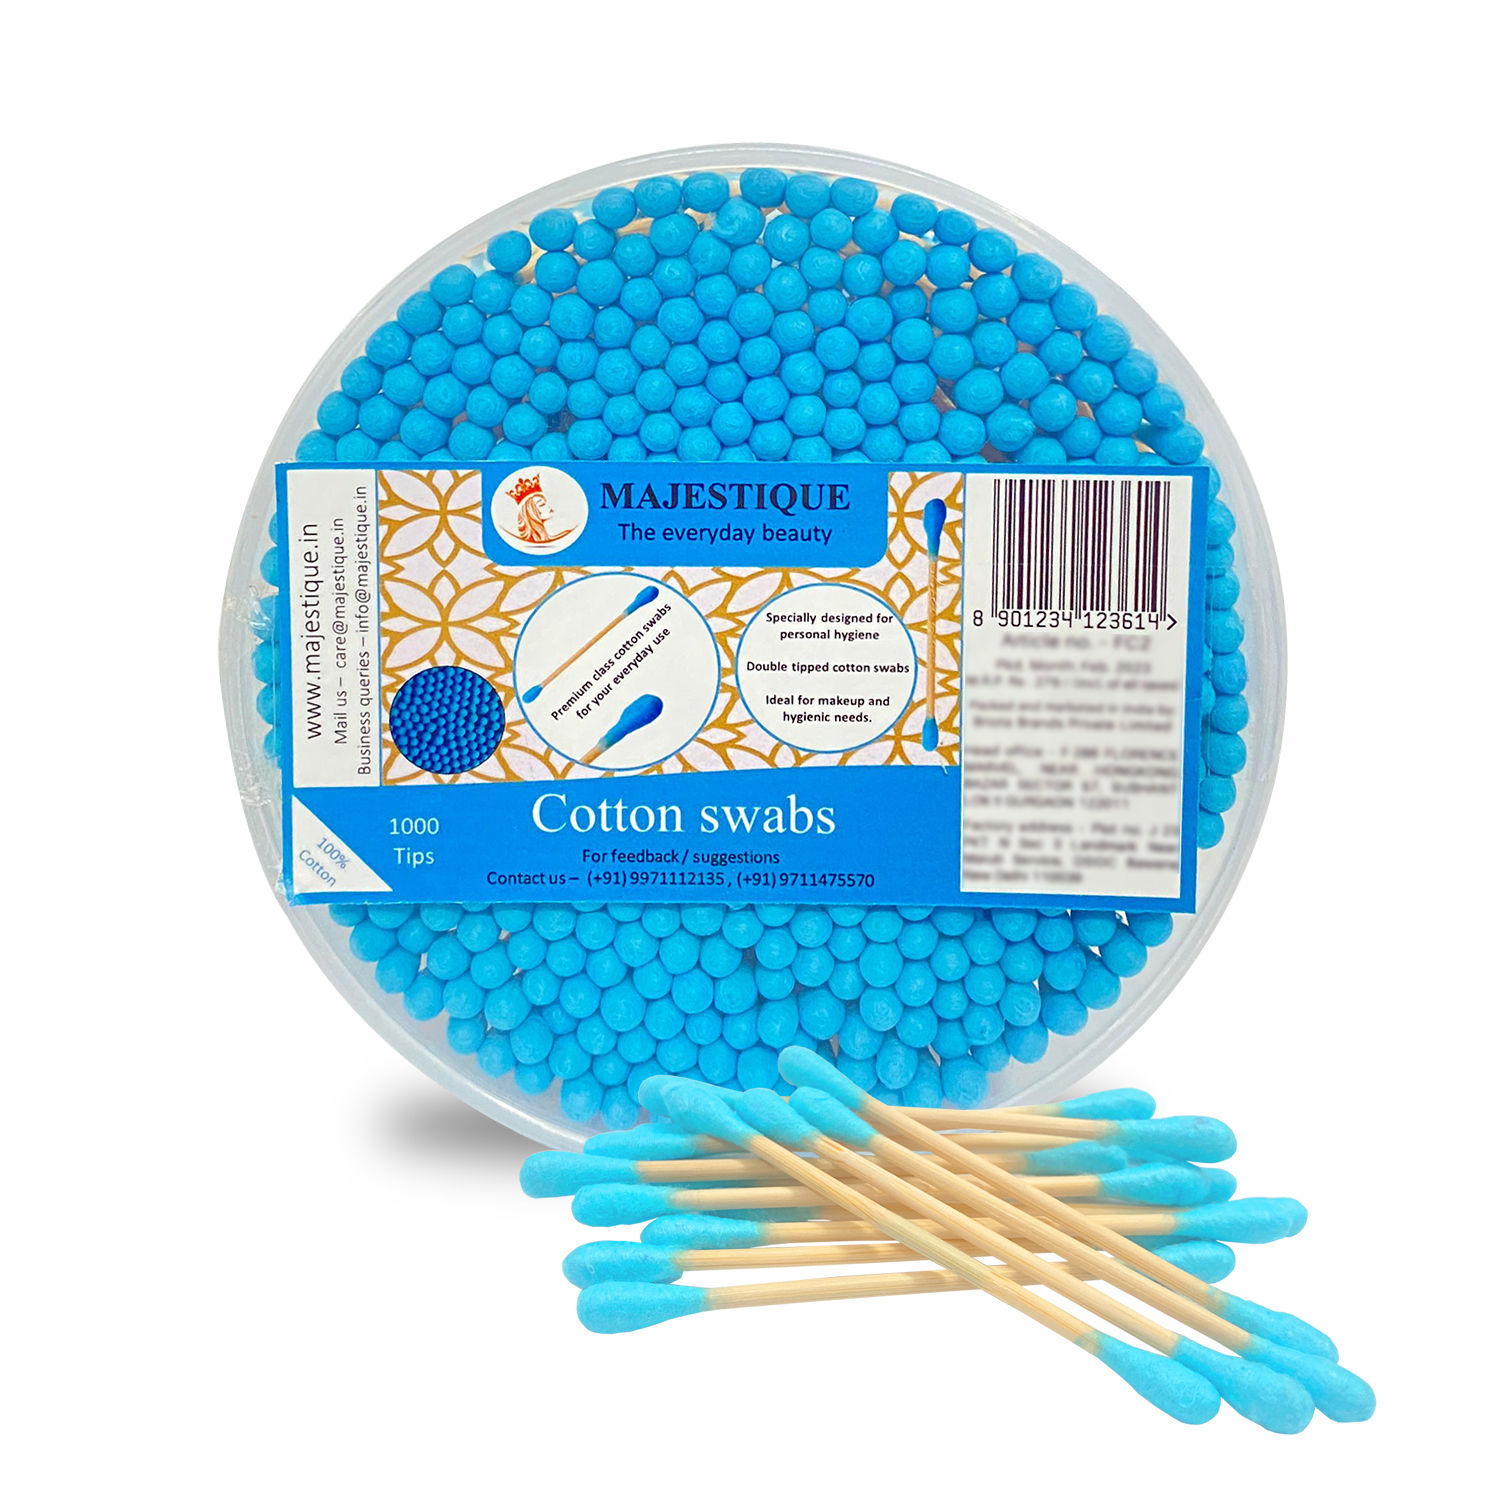 What to use cotton swabs for